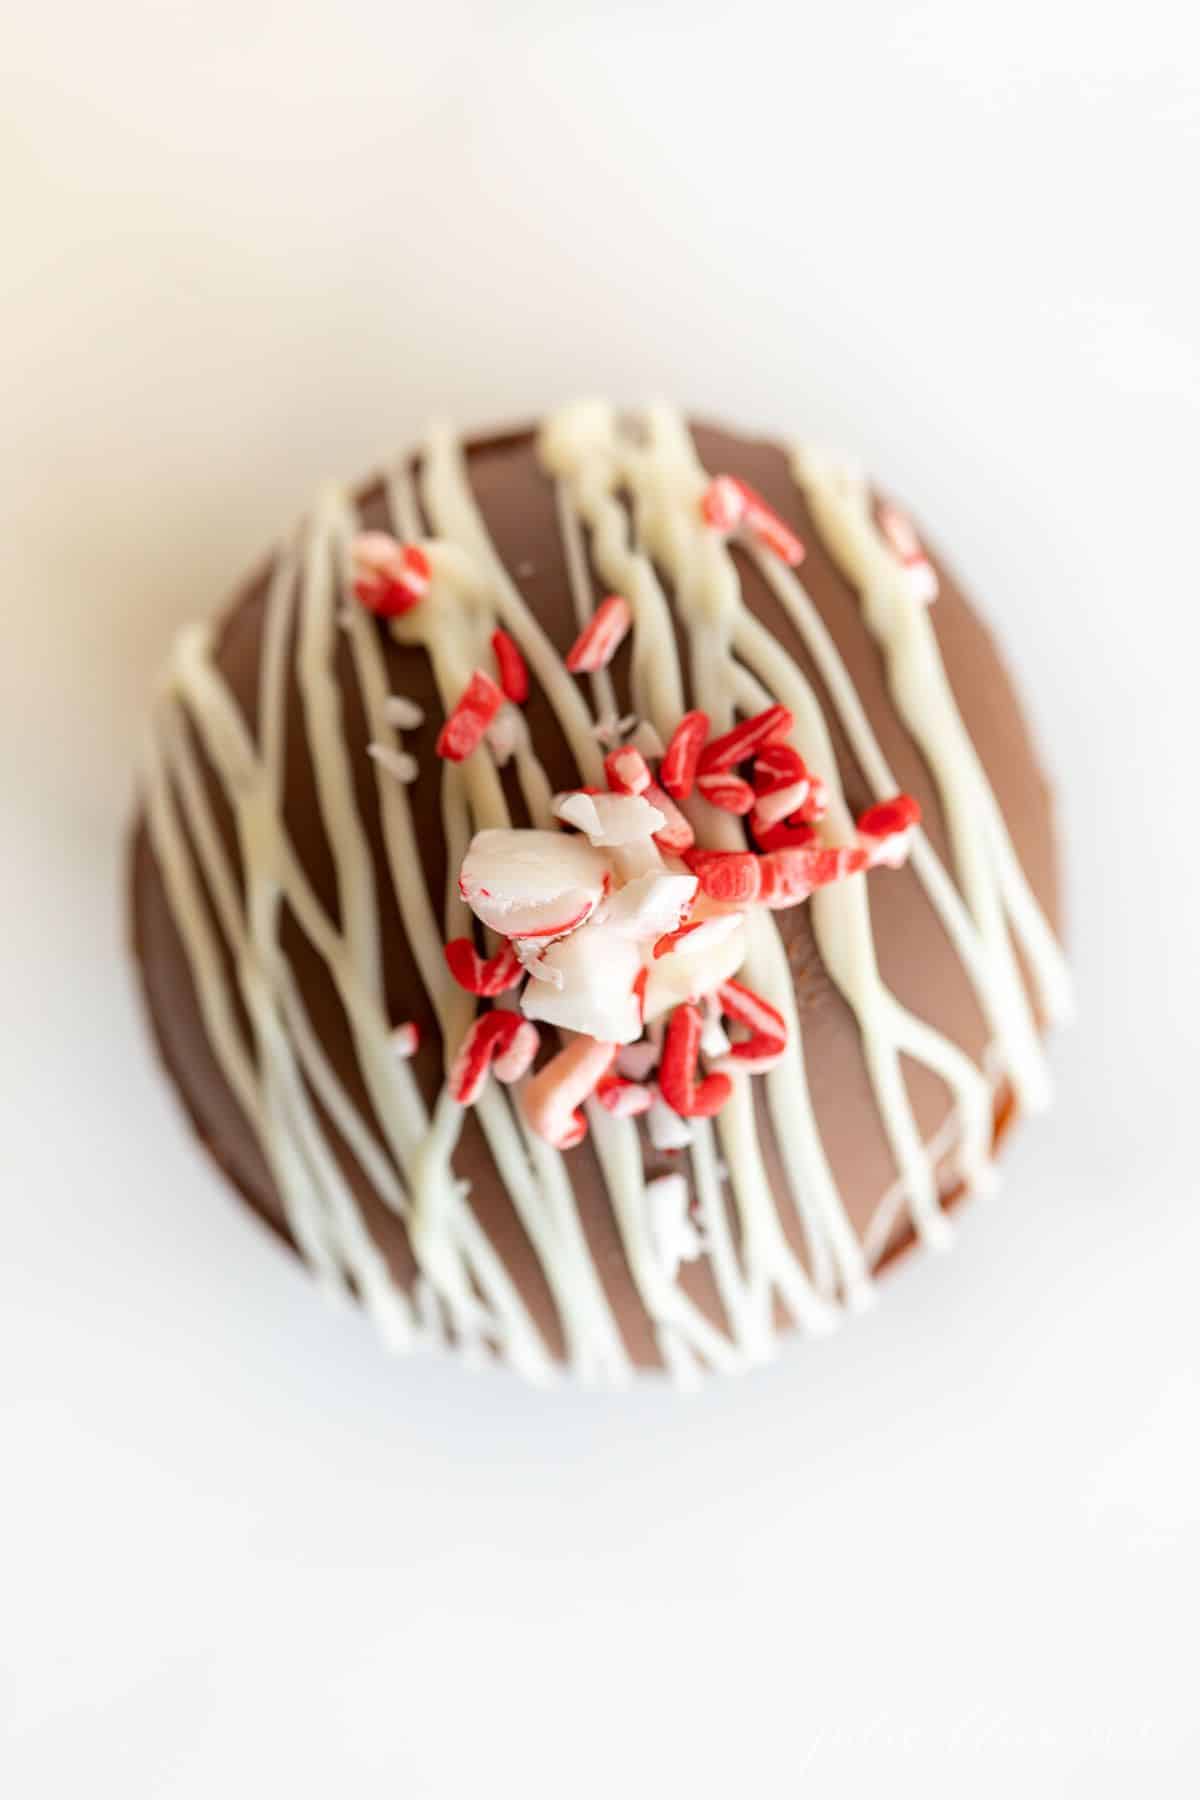 A single hot chocolate bomb on a marble surface, drizzled with white chocolate and topped with crushed peppermint.